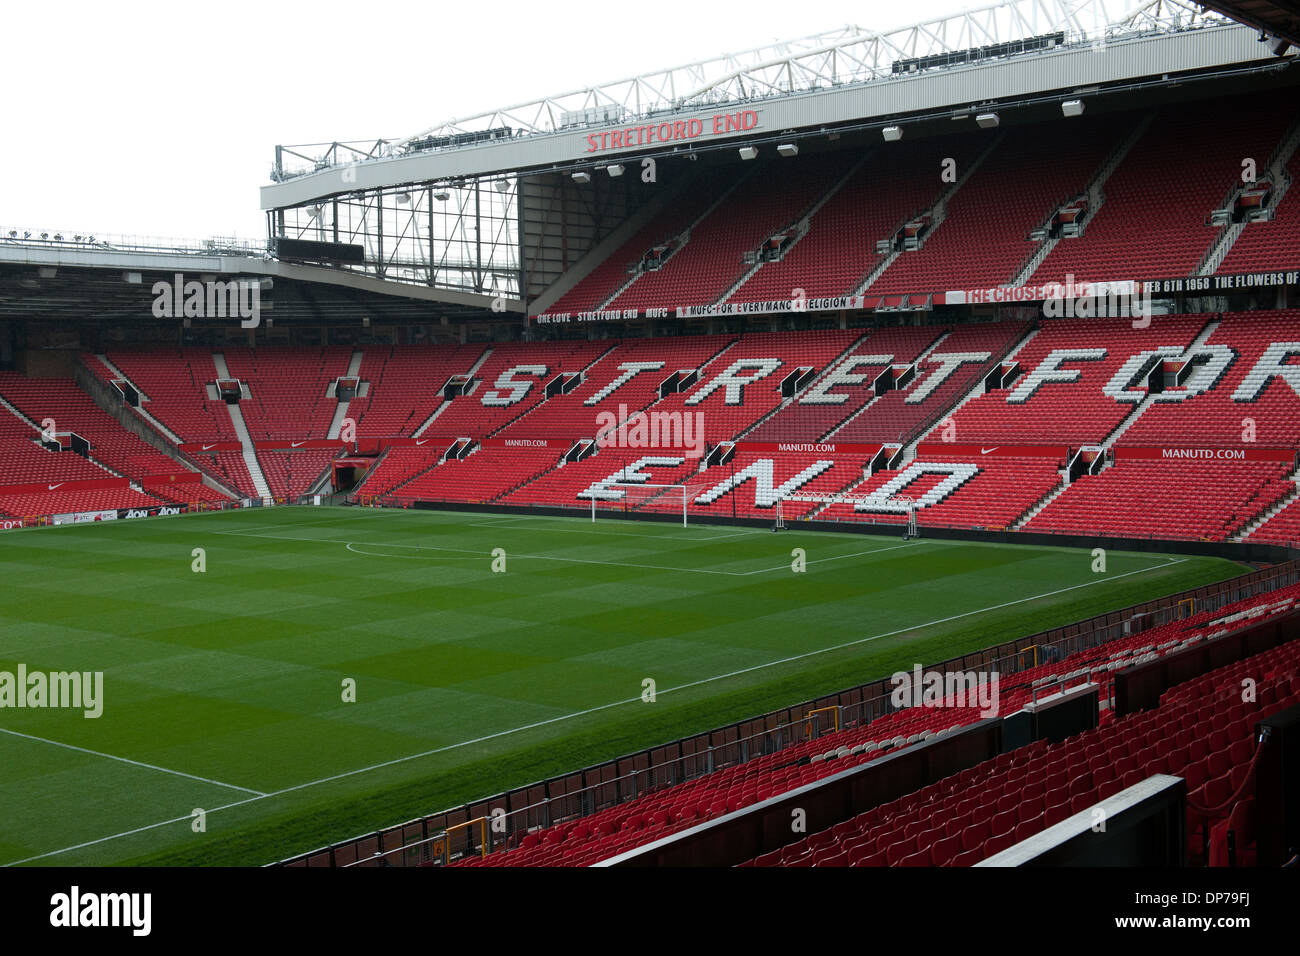 Old Trafford, domicile du club de football Manchester United, Manchester, Angleterre, Royaume-Uni. ; vue sur le Streford Fin Stand. Banque D'Images